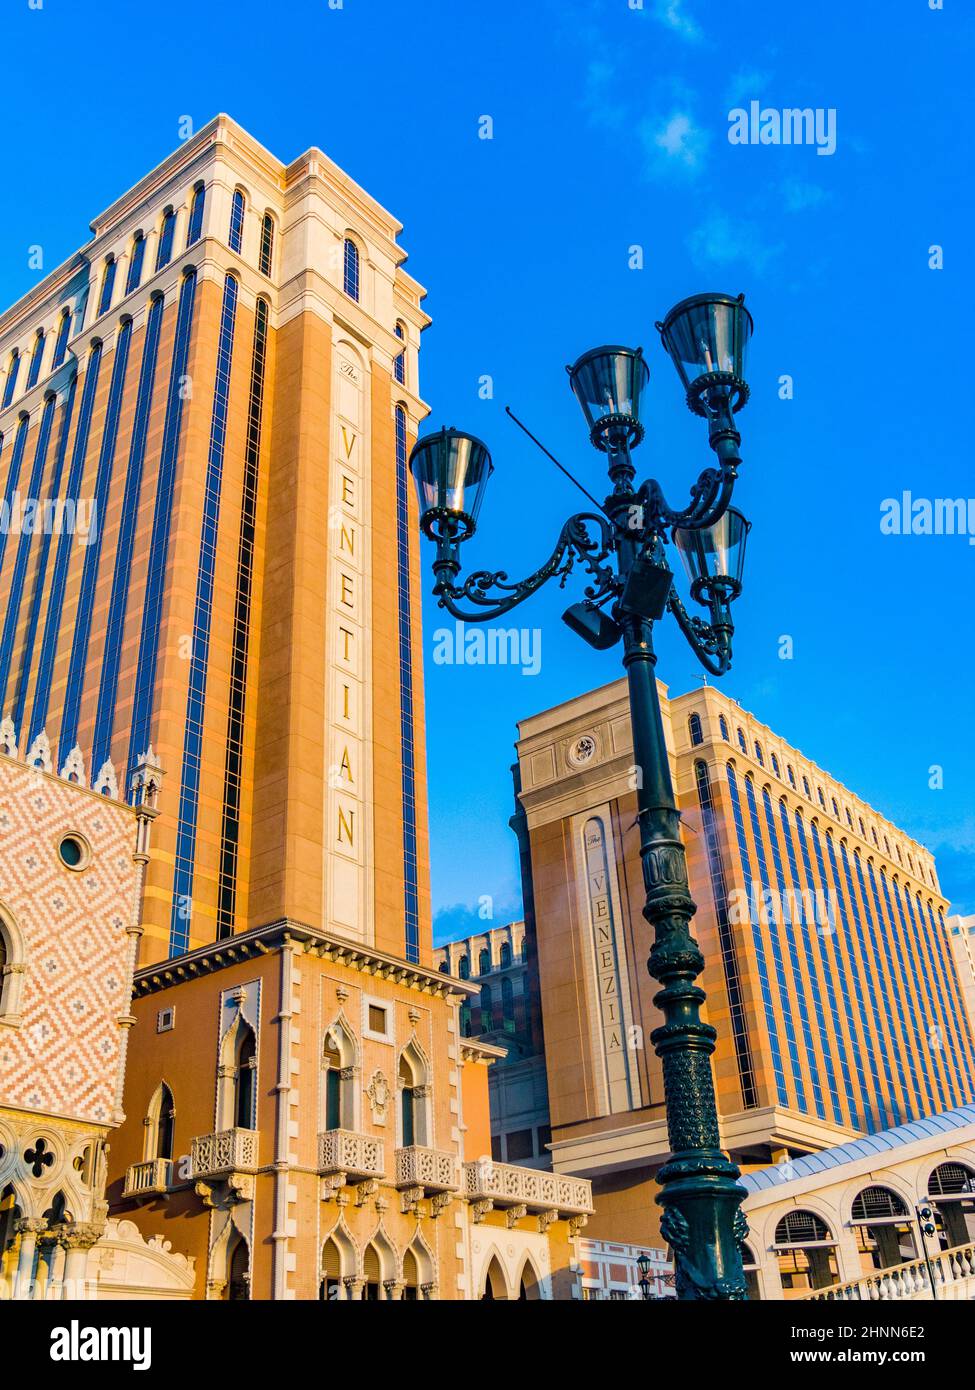 The Venetian Resort Hotel & Casino The resort opened on May 3, 1999 with flutter of white doves, sounding trumpets, singing gondoliers and actress Sophia Loren Stock Photo